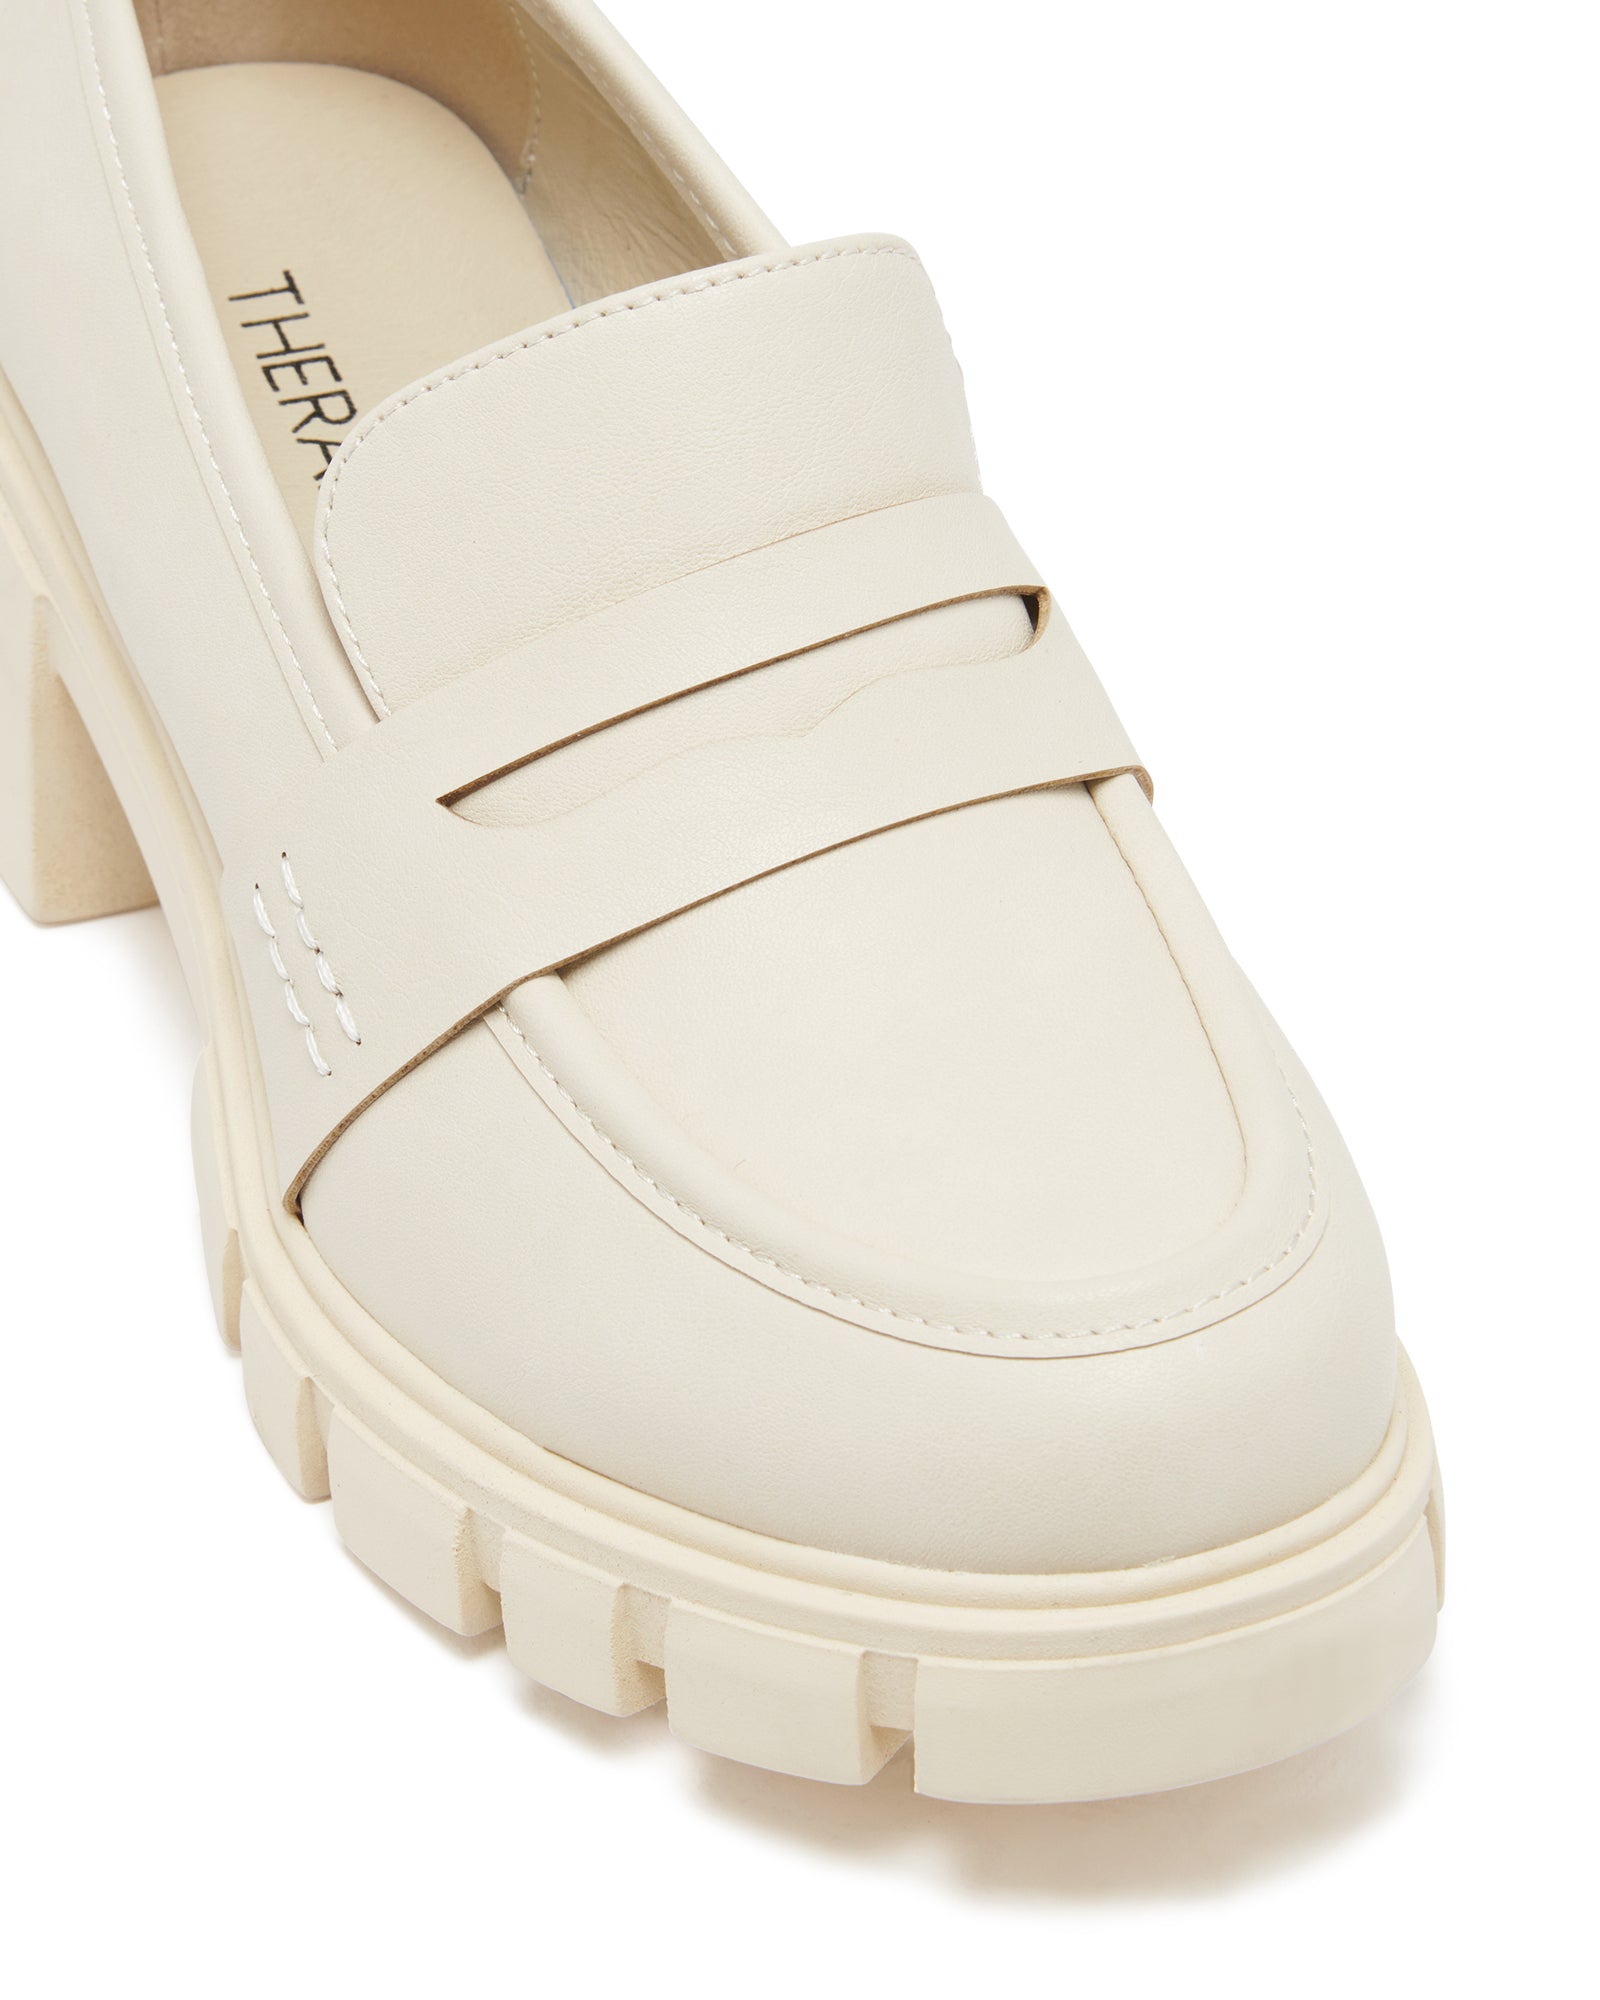 Therapy Shoes Revolve Bone | Women's Loafers | Heels | Platform | Chunky